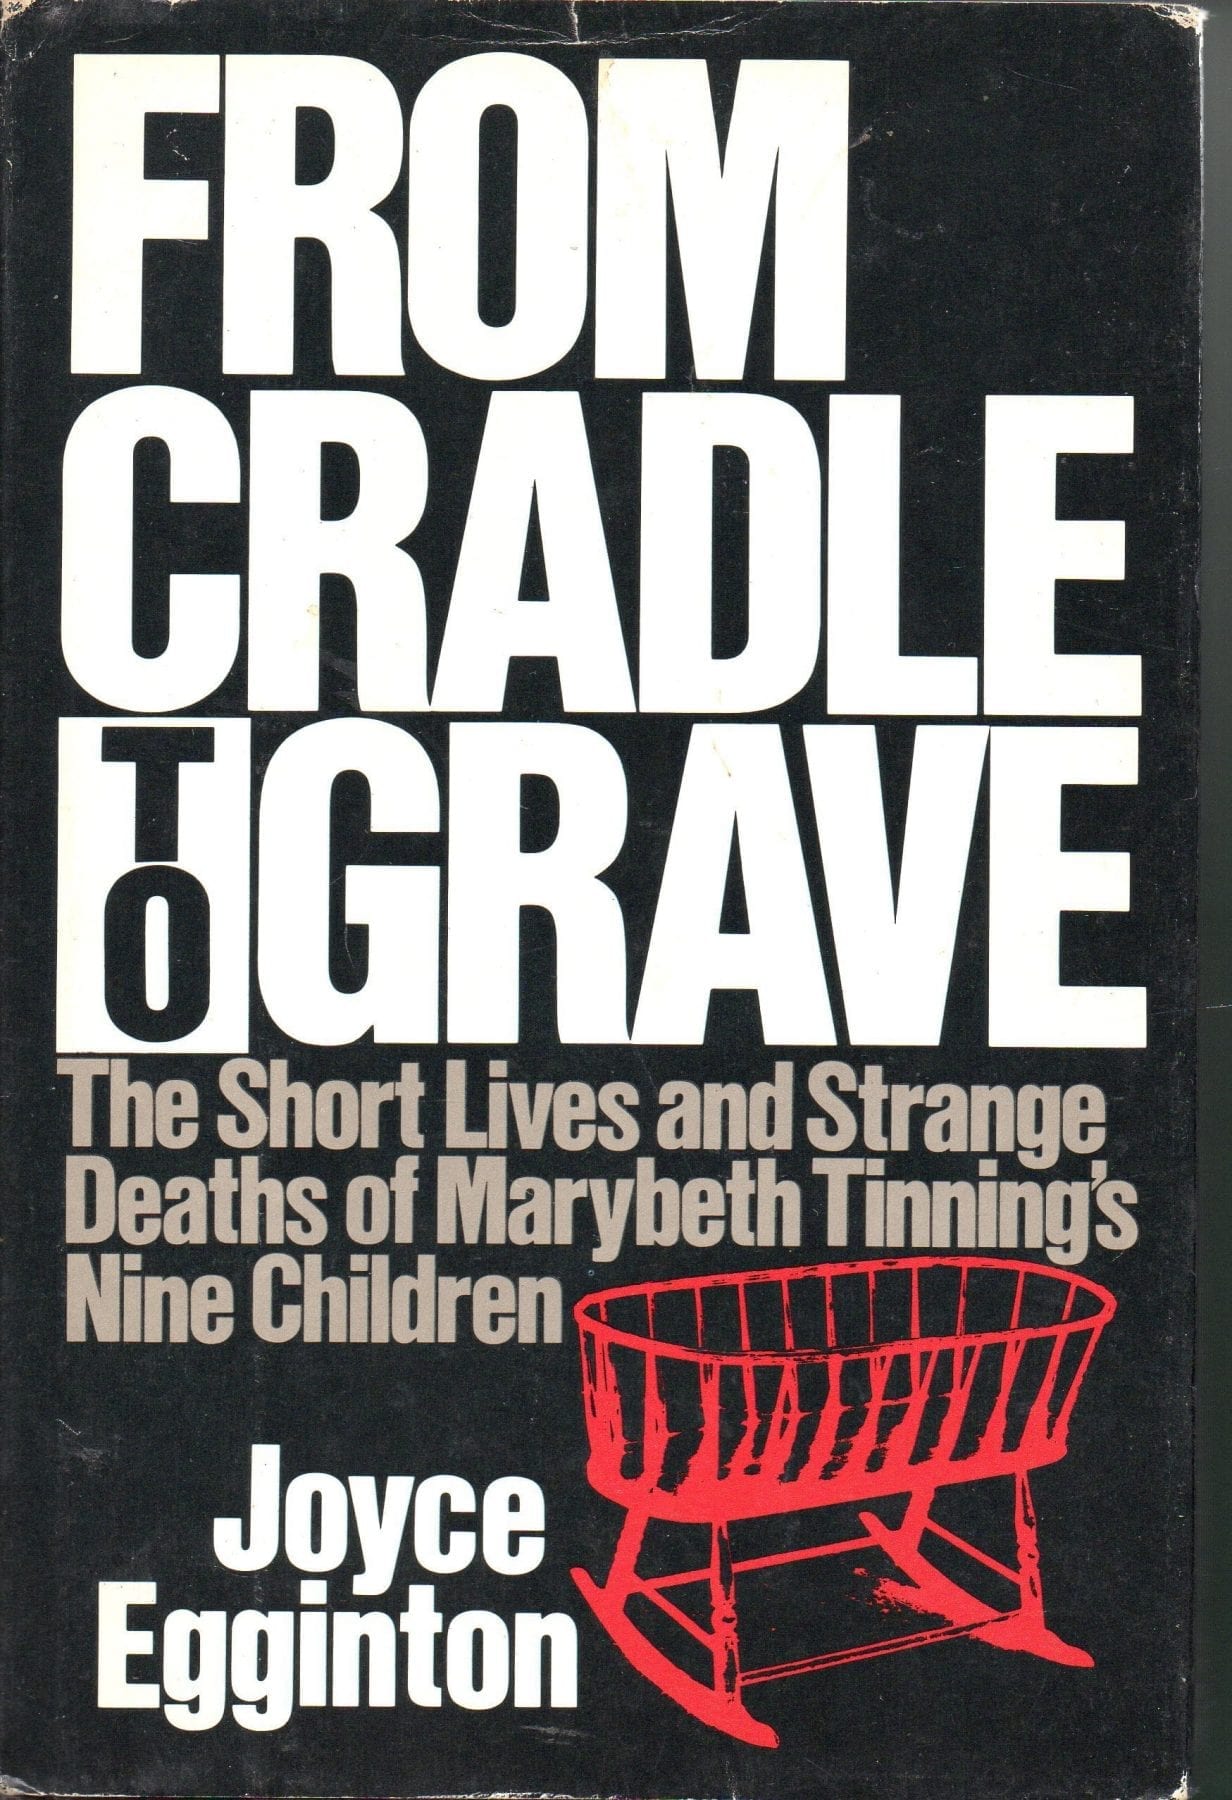 Cover of From Cradle to Grave- The Short Lives and Strange Deaths of Maybeth Tinning’s Nine Children by Joyce Egginton